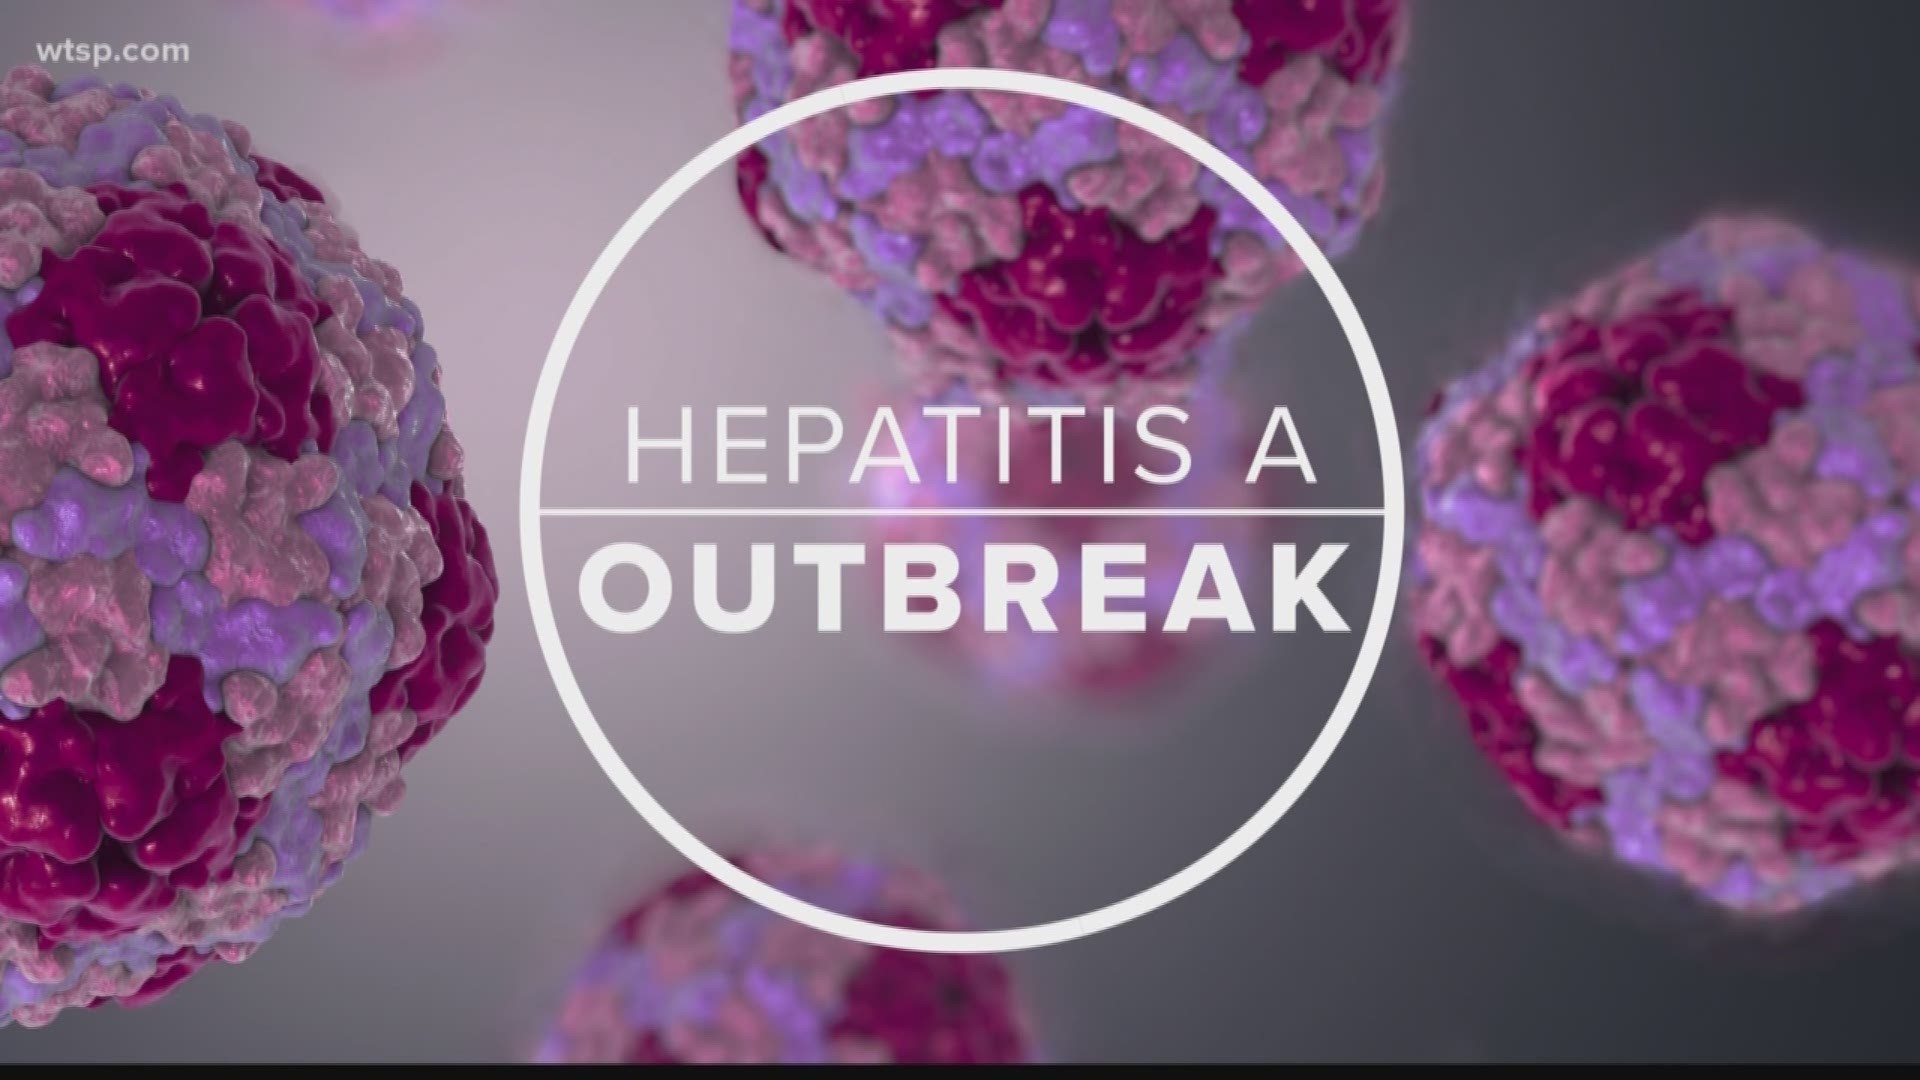 A restaurant worker who tested positive for hepatitis A may have exposed customers earlier this month, according to the Florida Department of Health in Hernando County.

The Department of Health said a Village Pizza Restaurant employee may have exposed customers between May 29 and June 5.

Hepatitis A vaccine or immune globulin may provide protection against the disease if given within two weeks after exposure. A hepatitis A vaccination is recommended for anyone who ate or drank between June 4-5 from Village Pizza, which is located at 4070 Deltona Blvd. in Spring Hill.

Village Pizza owner Mark Kucan said state officials came to the restaurant, inspected it and completed their paperwork.

Kucan said Village Pizza complied with the state. Village Pizza has continued to operate even after the restaurant became aware of their worker testing positive for hepatitis A on June 9, Kucan said.

Kucan said one of the state inspectors told him it wasn't his company's fault.

Hepatitis A is a preventable liver disease that’s transmitted through contact with food, drinks or other objects contaminated by small amounts of feces from an infected person.